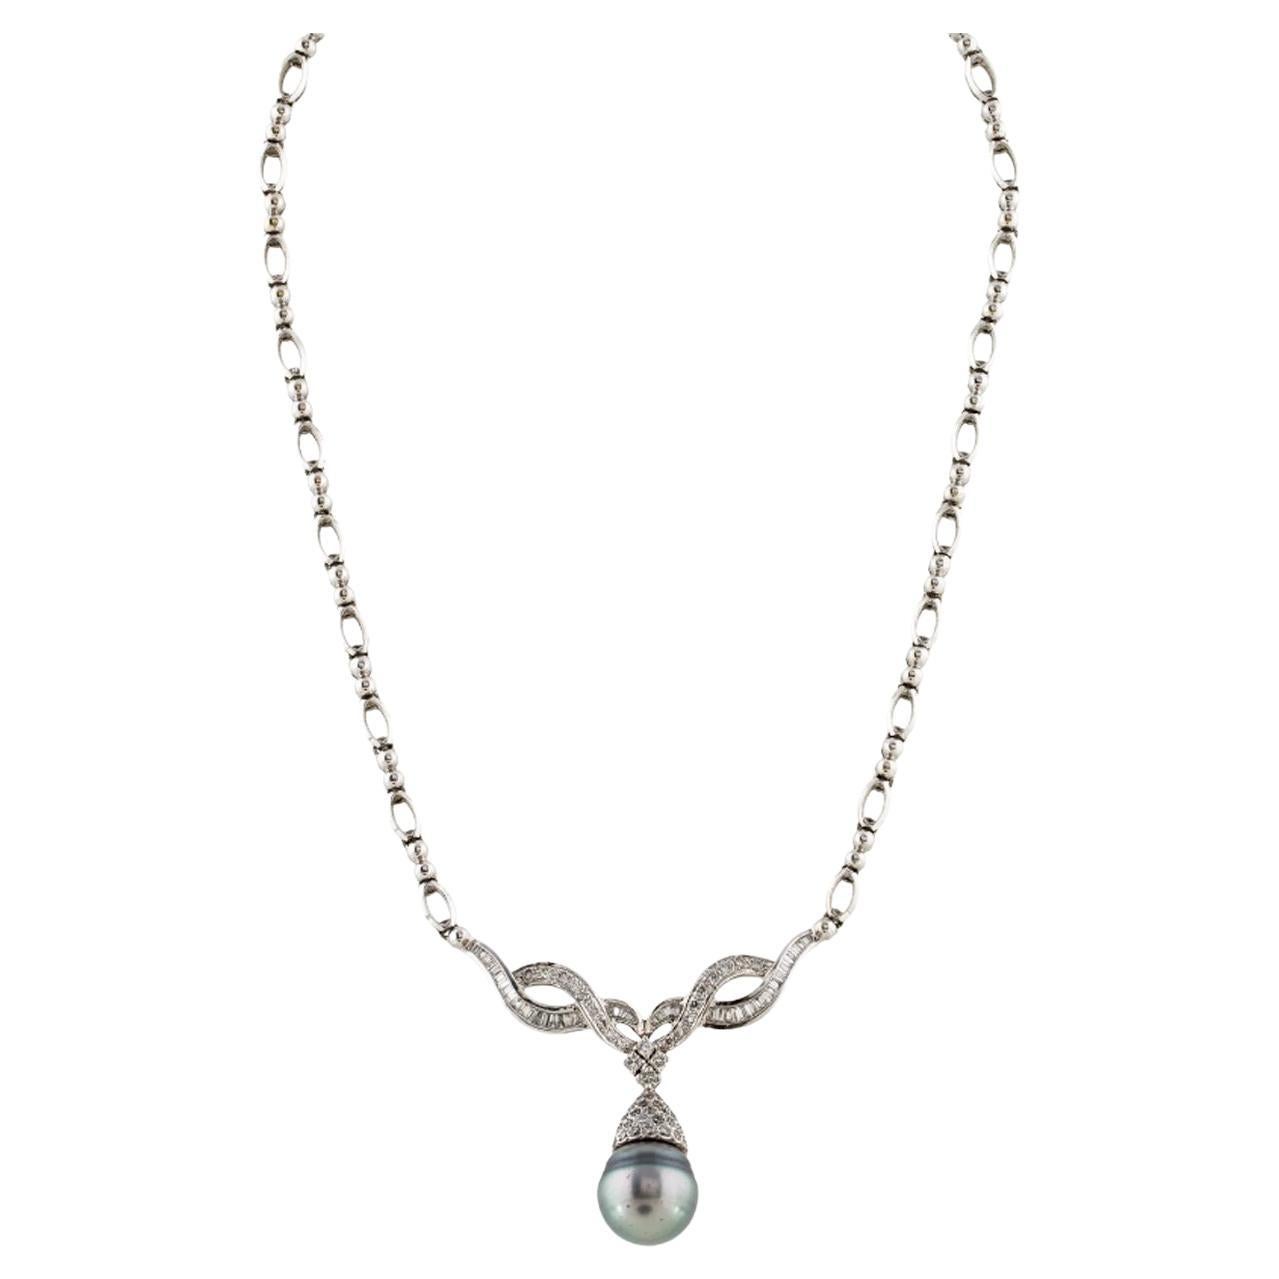 Diana M. 18 kt white gold diamond and pearl necklace featuring a center 14.00mm For Sale